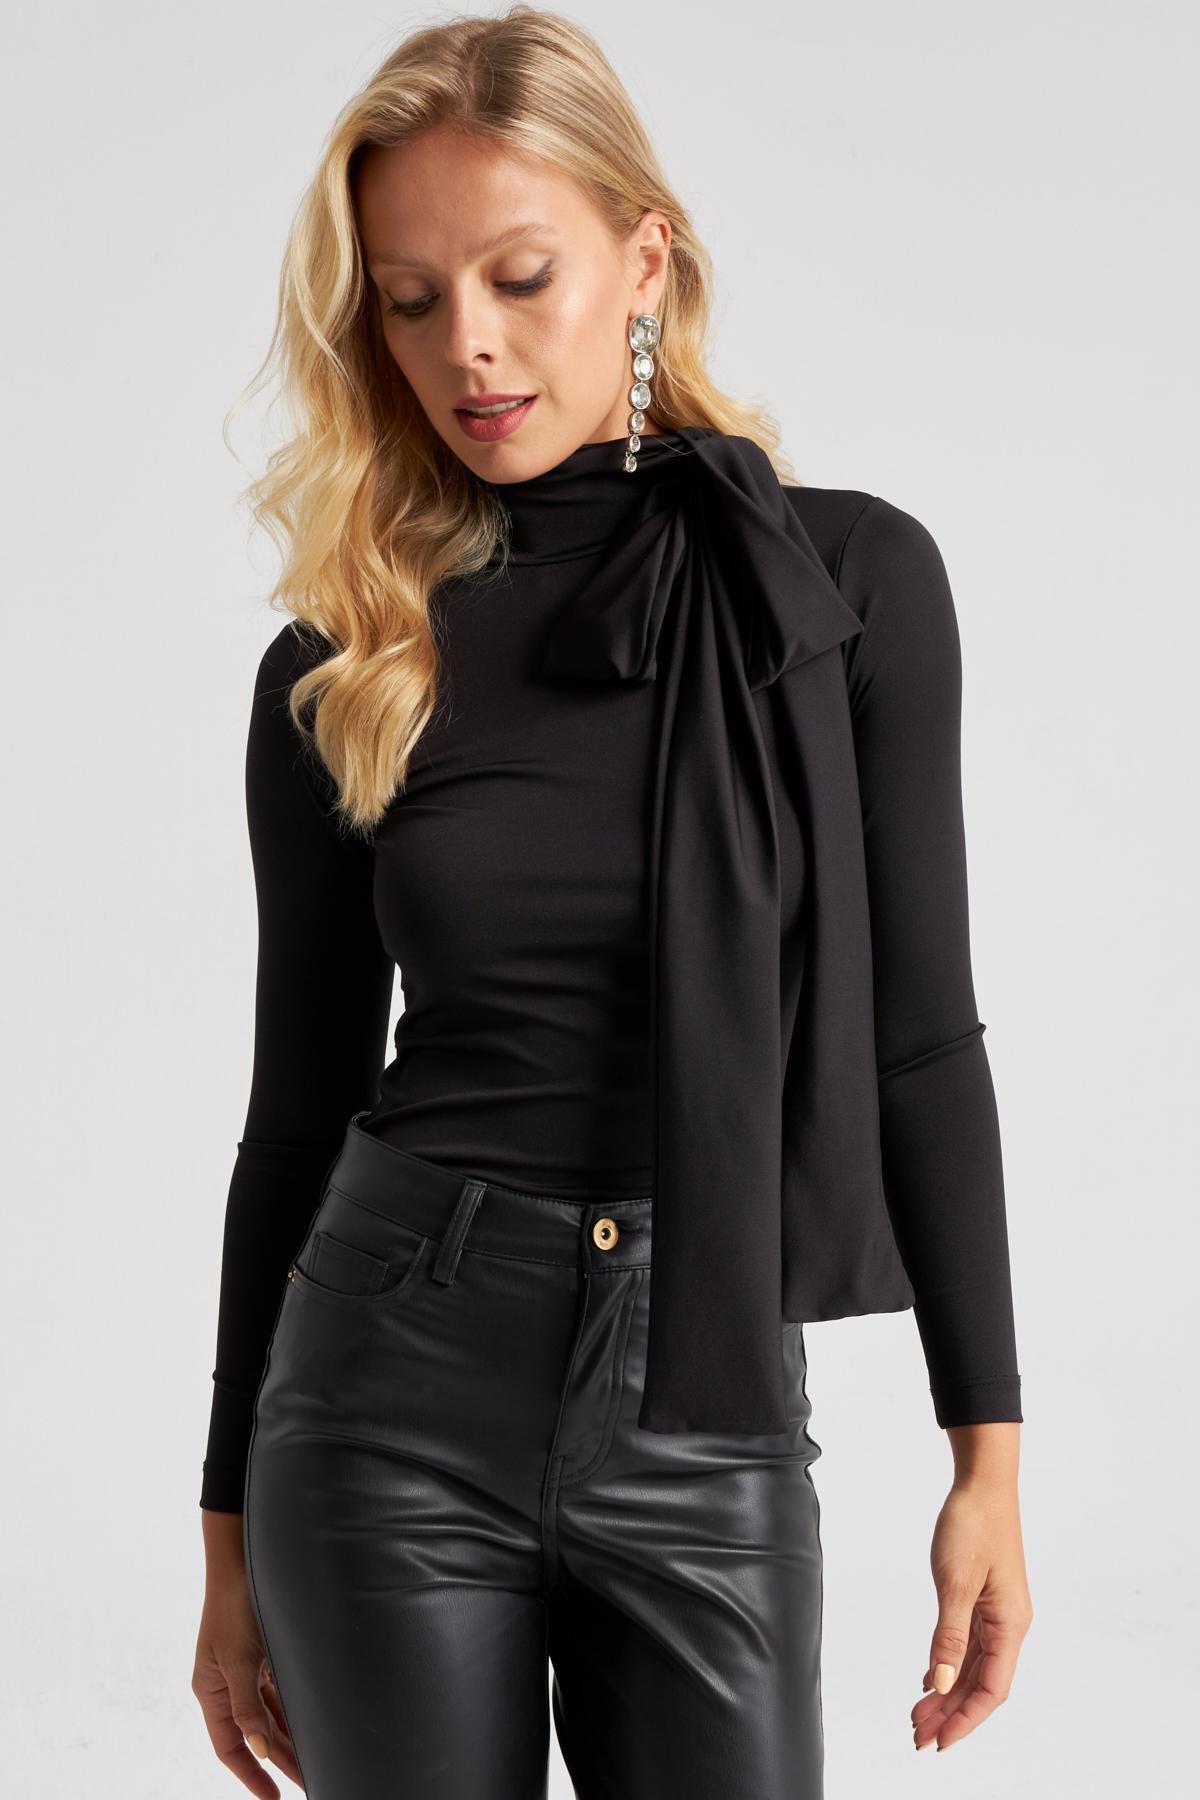 Cool & Sexy - Black Bow Blouse